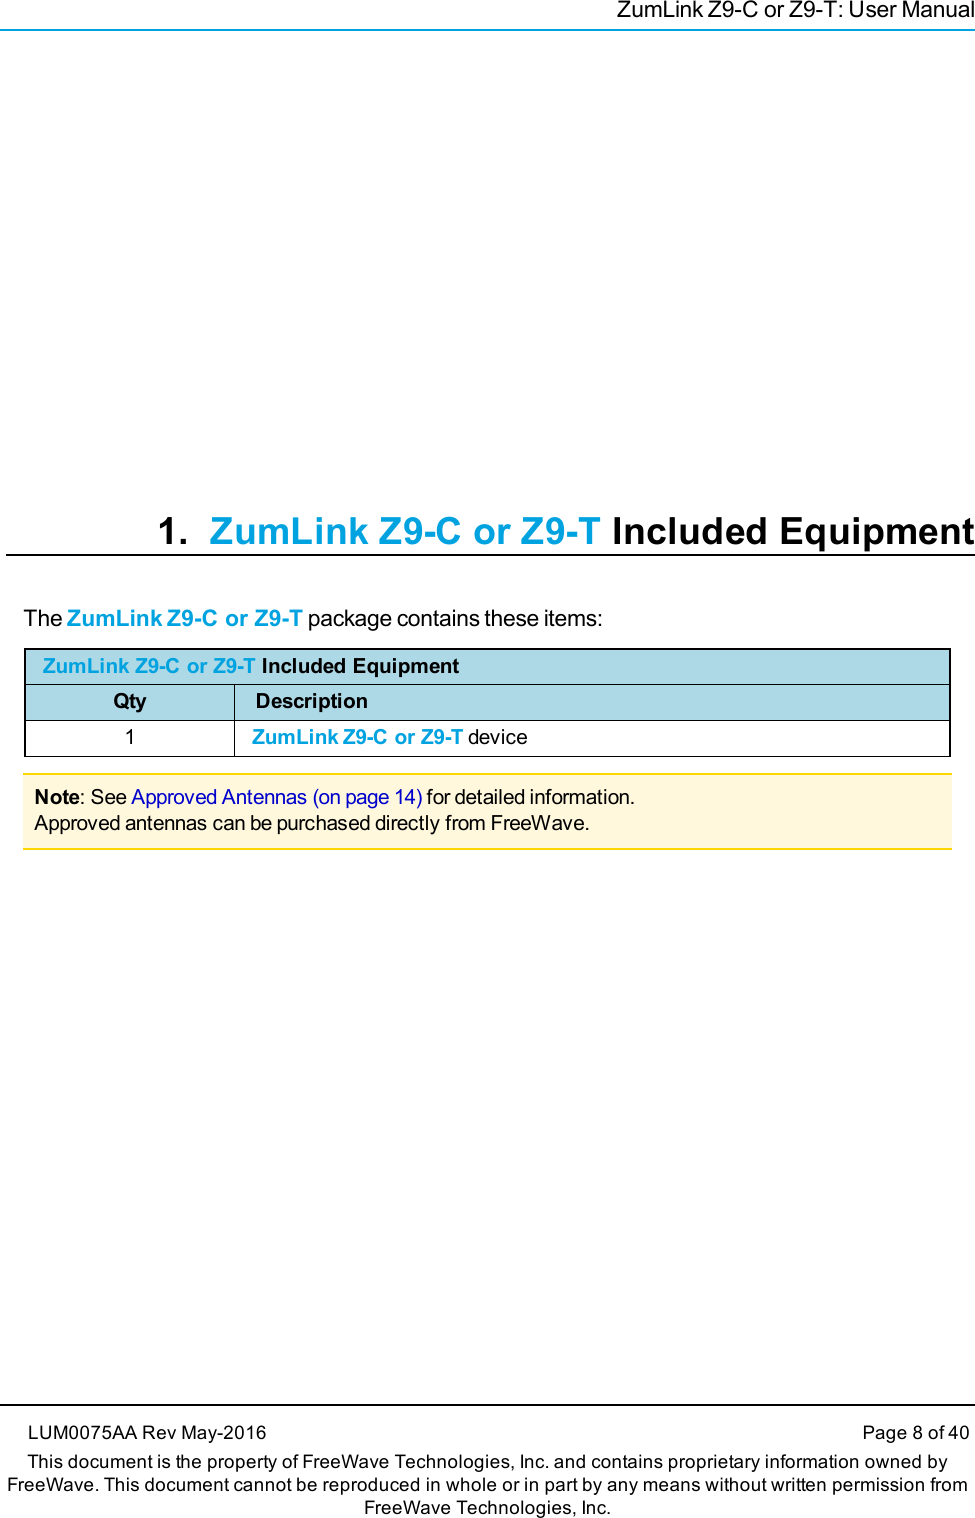 ZumLink Z9-C or Z9-T: User Manual1. ZumLink Z9-C or Z9-T Included EquipmentThe ZumLink Z9-C or Z9-T package contains these items:ZumLink Z9-C or Z9-T Included EquipmentQty Description1ZumLink Z9-C or Z9-T deviceNote: See Approved Antennas (on page 14) for detailed information.Approved antennas can be purchased directly from FreeWave.LUM0075AA Rev May-2016 Page 8 of 40This document is the property of FreeWave Technologies, Inc. and contains proprietary information owned byFreeWave. This document cannot be reproduced in whole or in part by any means without written permission fromFreeWave Technologies, Inc.